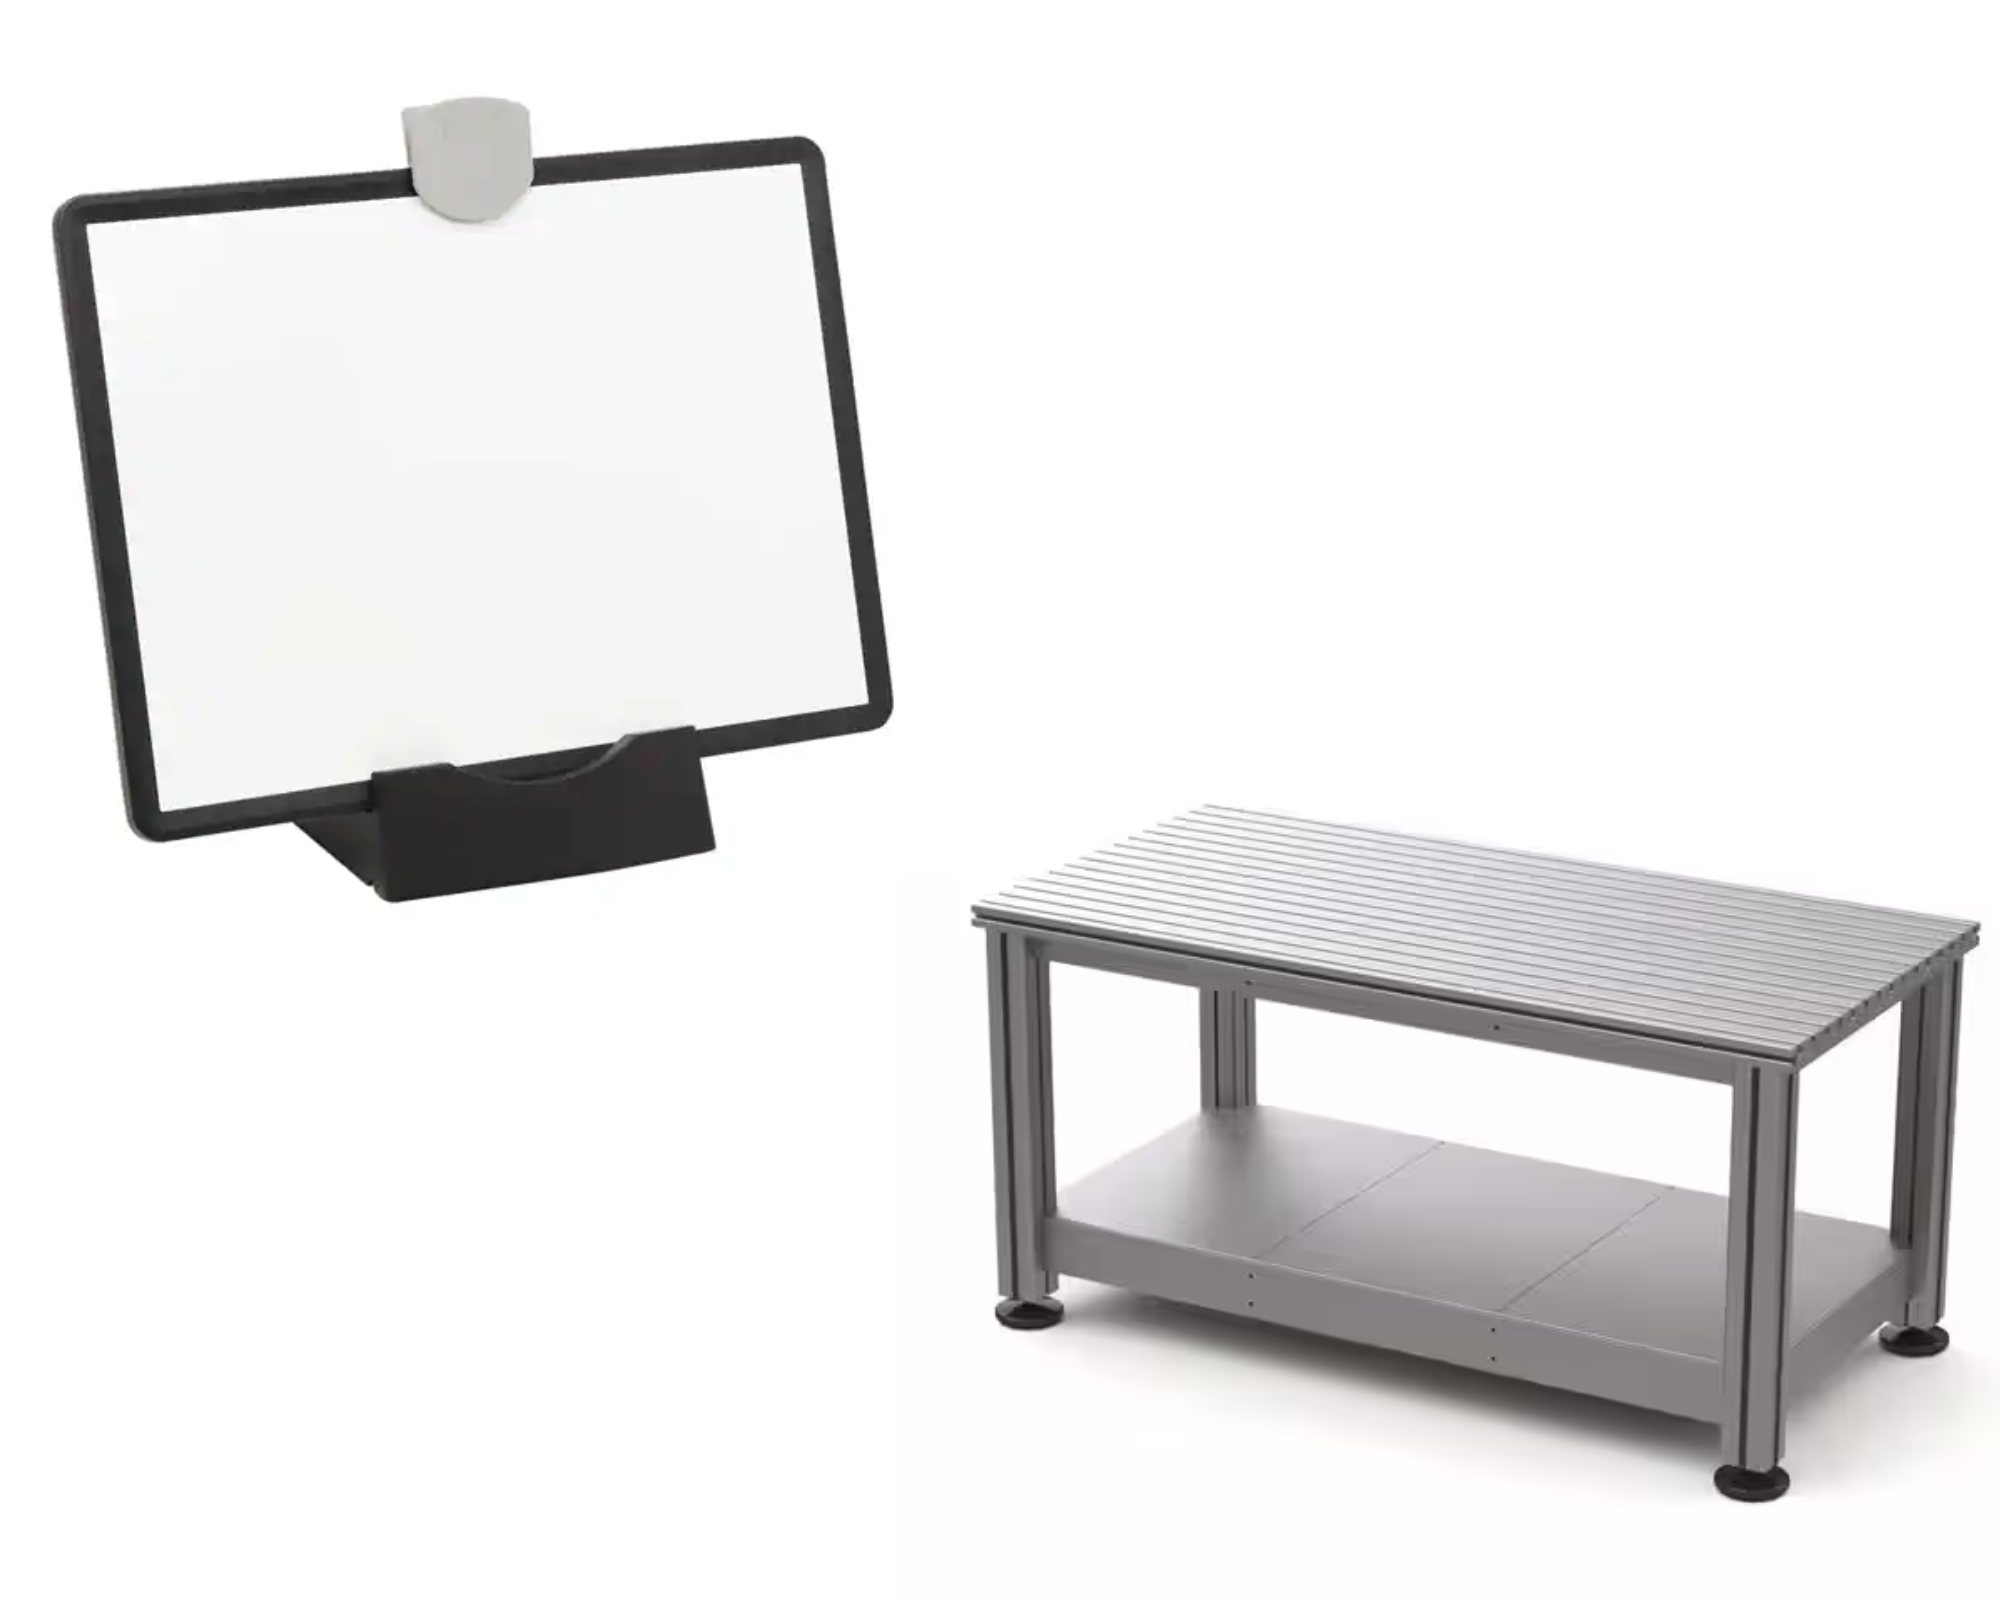 Accessories for Workbenches and Stations